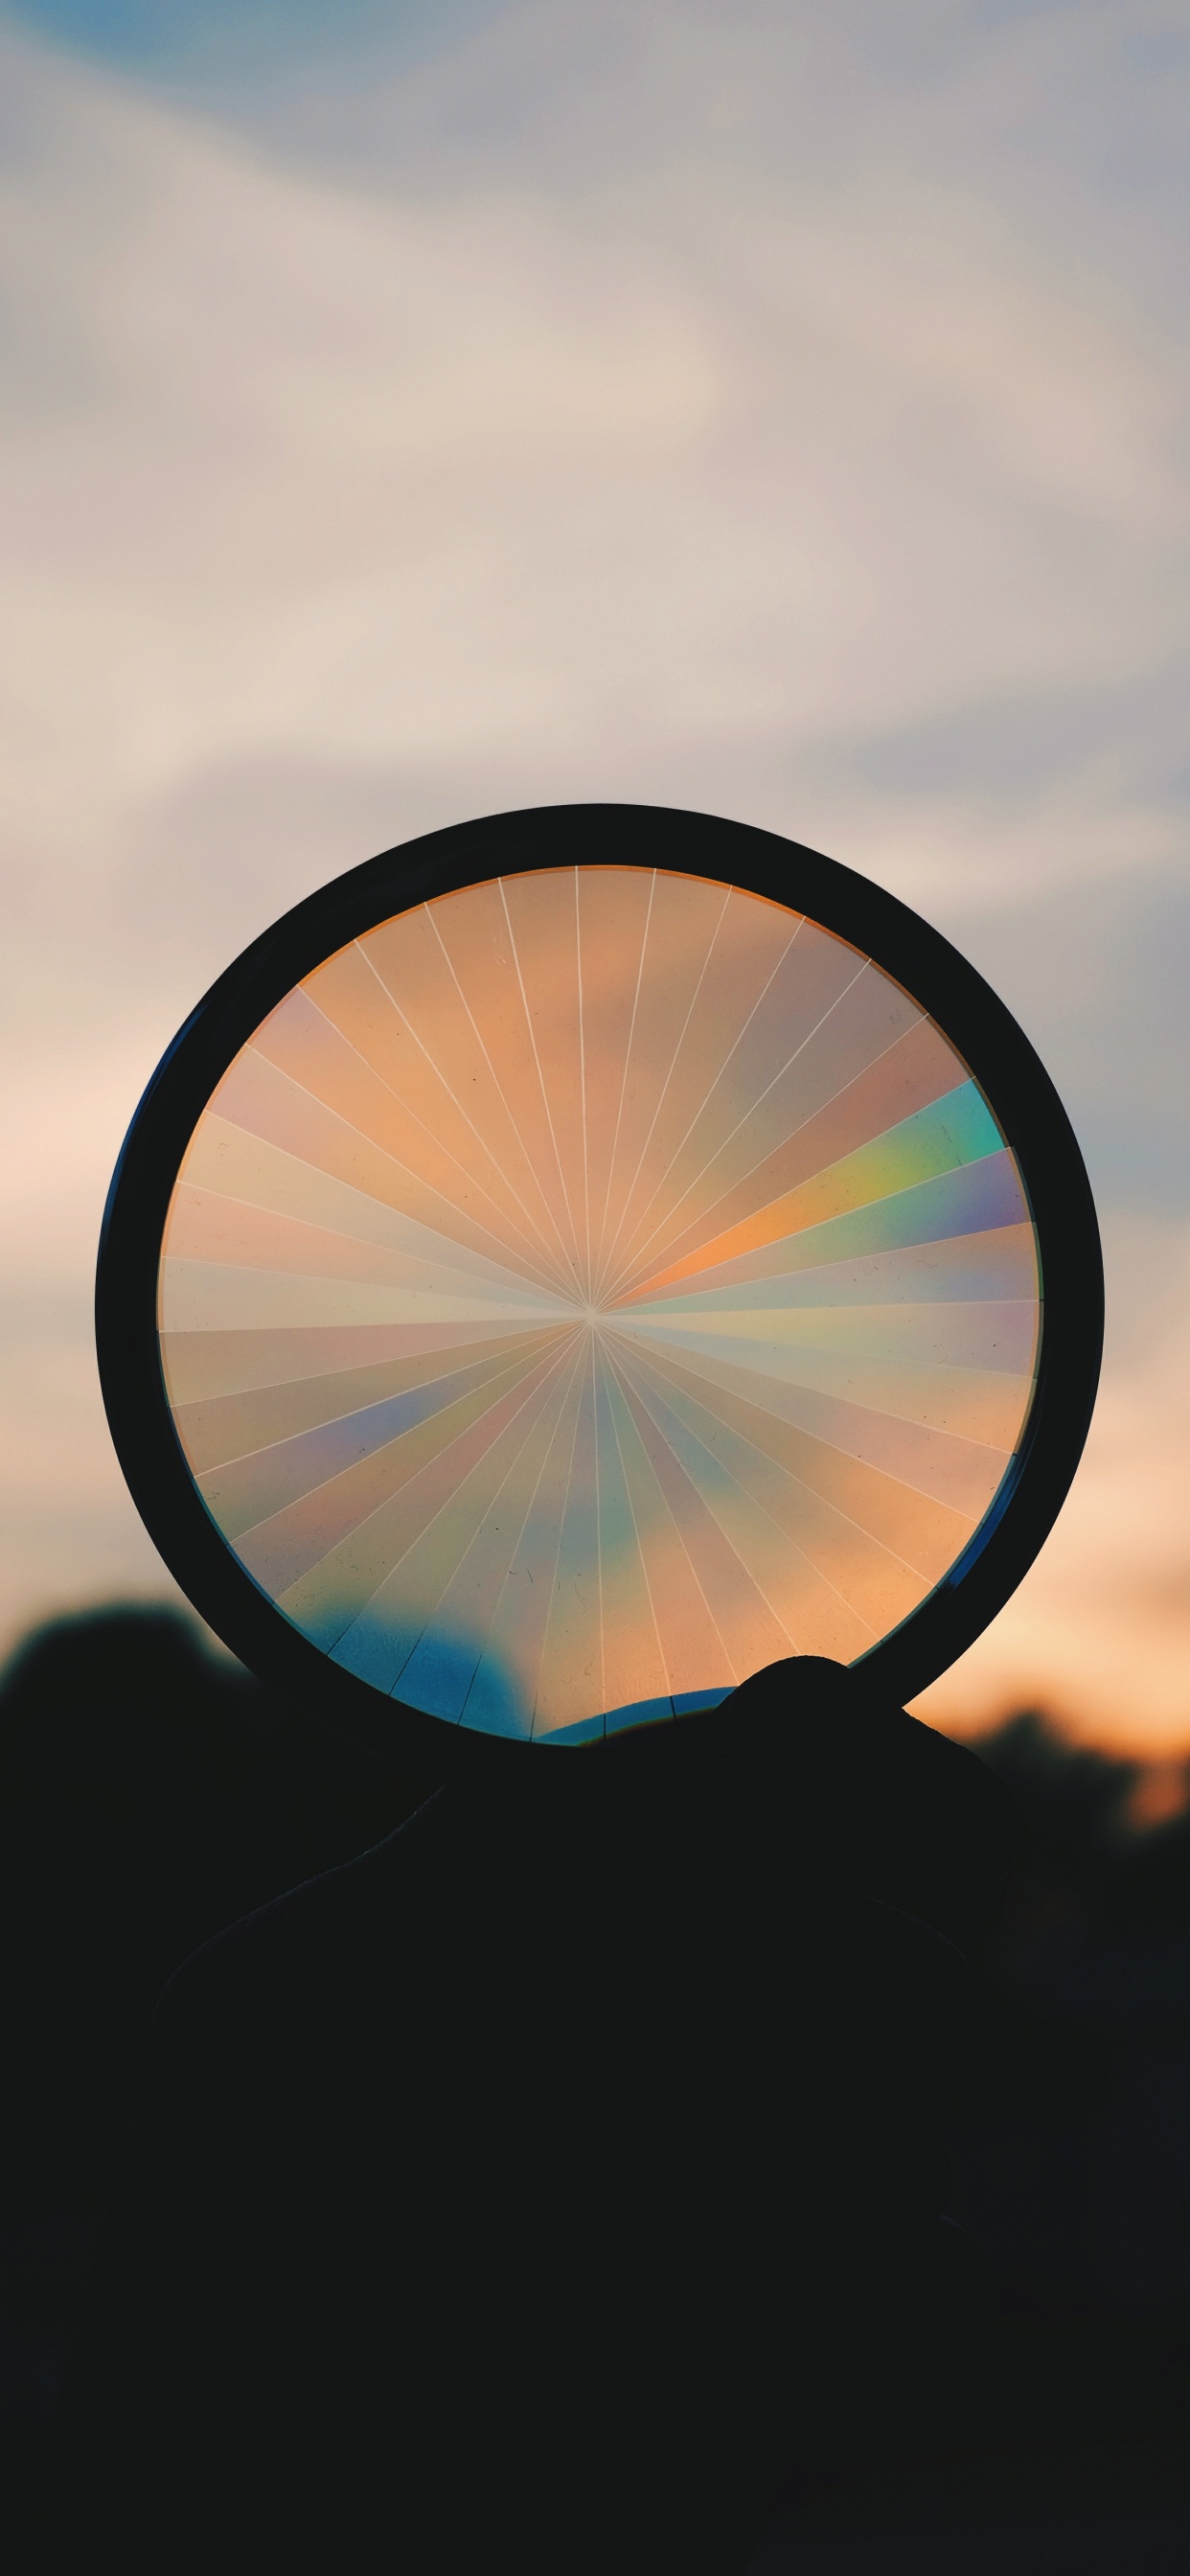 Silhouette of Round Mirror With Sun Rays. Wallpaper in 1242x2688 Resolution